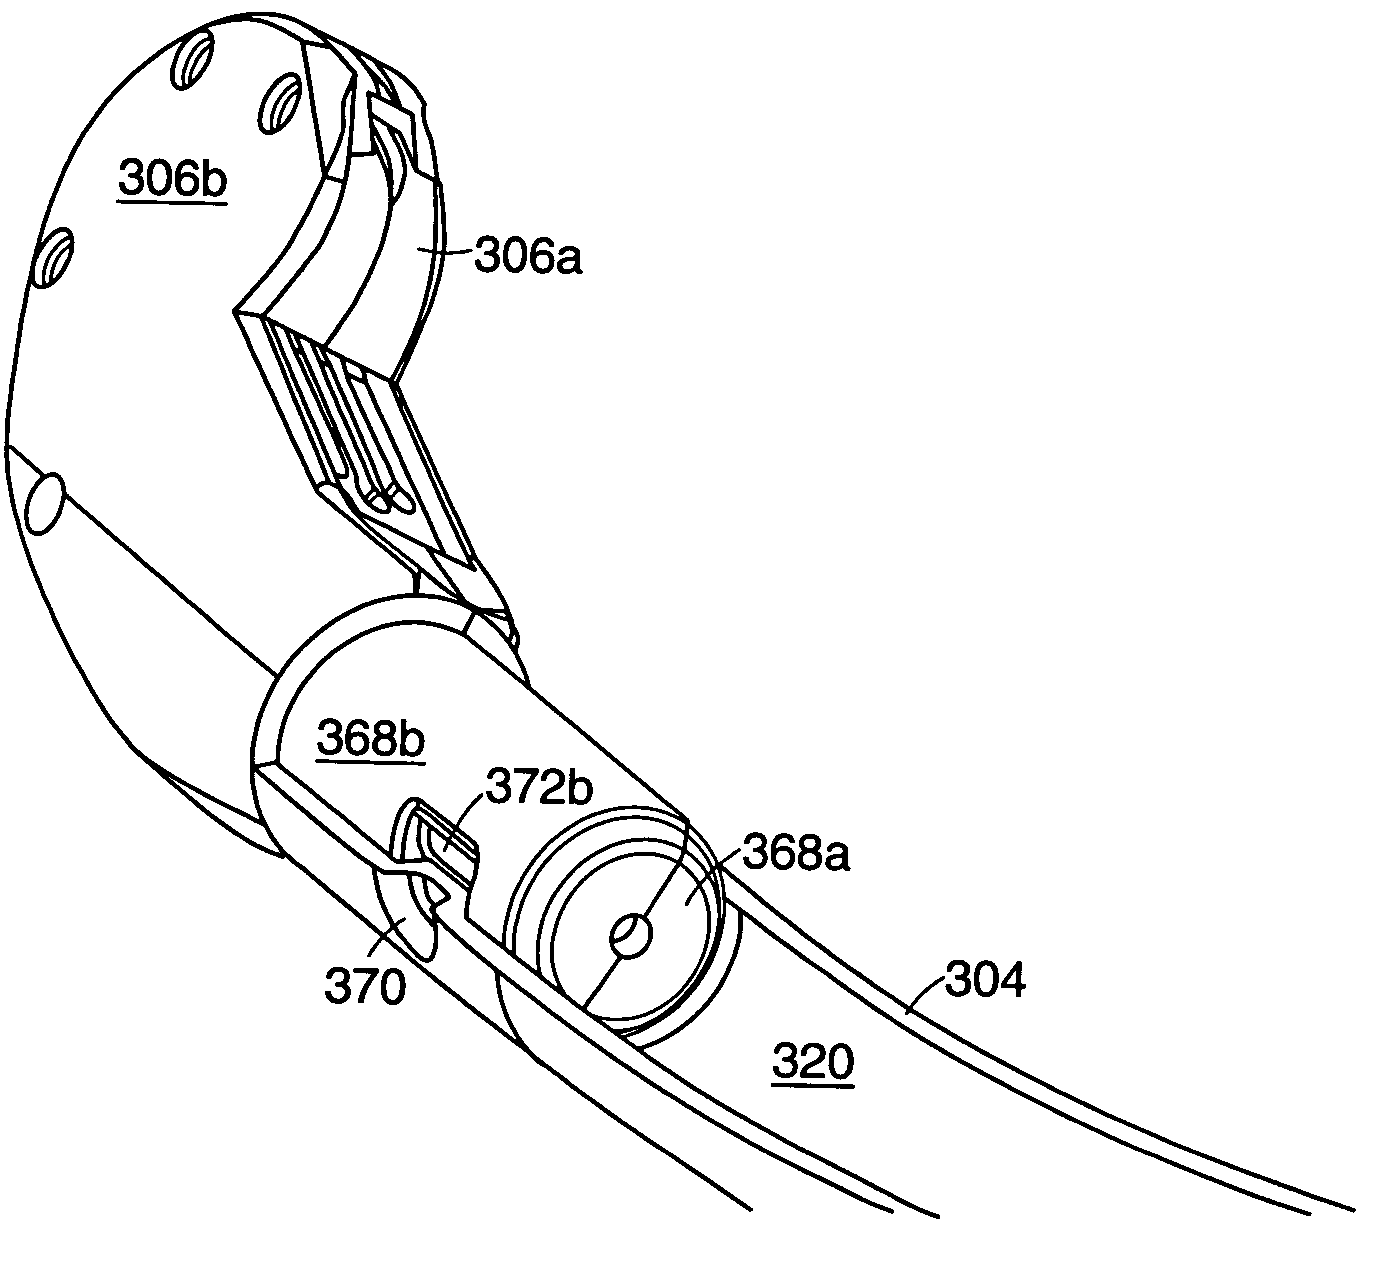 Suturing instruments and methods of use